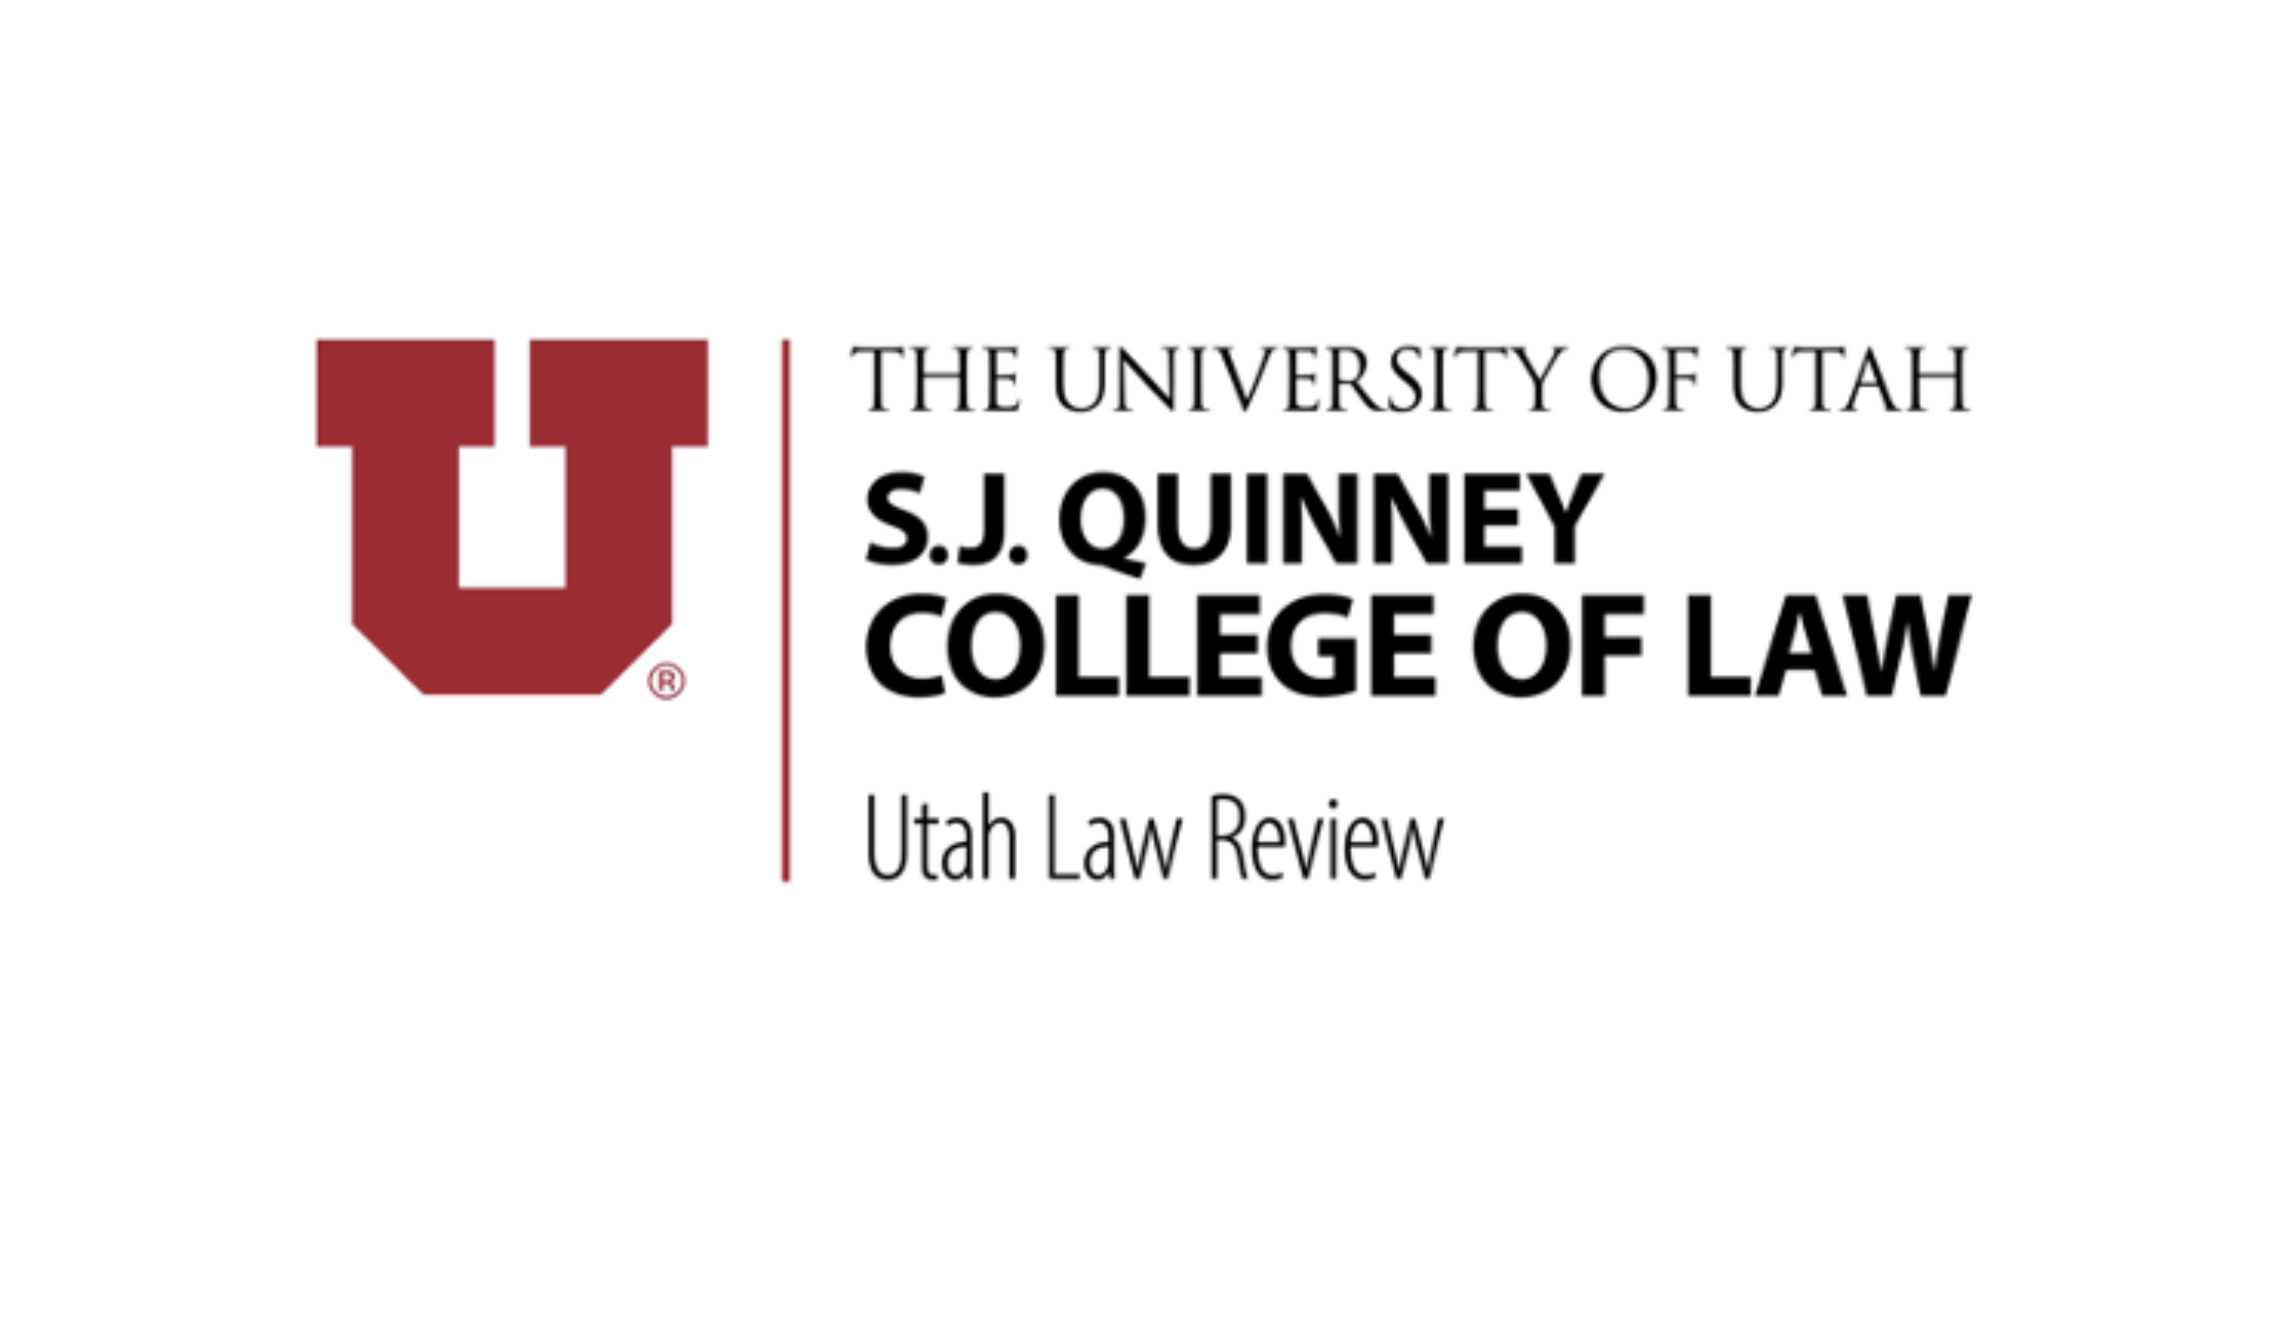 Utah Law Review Opportunity Fund